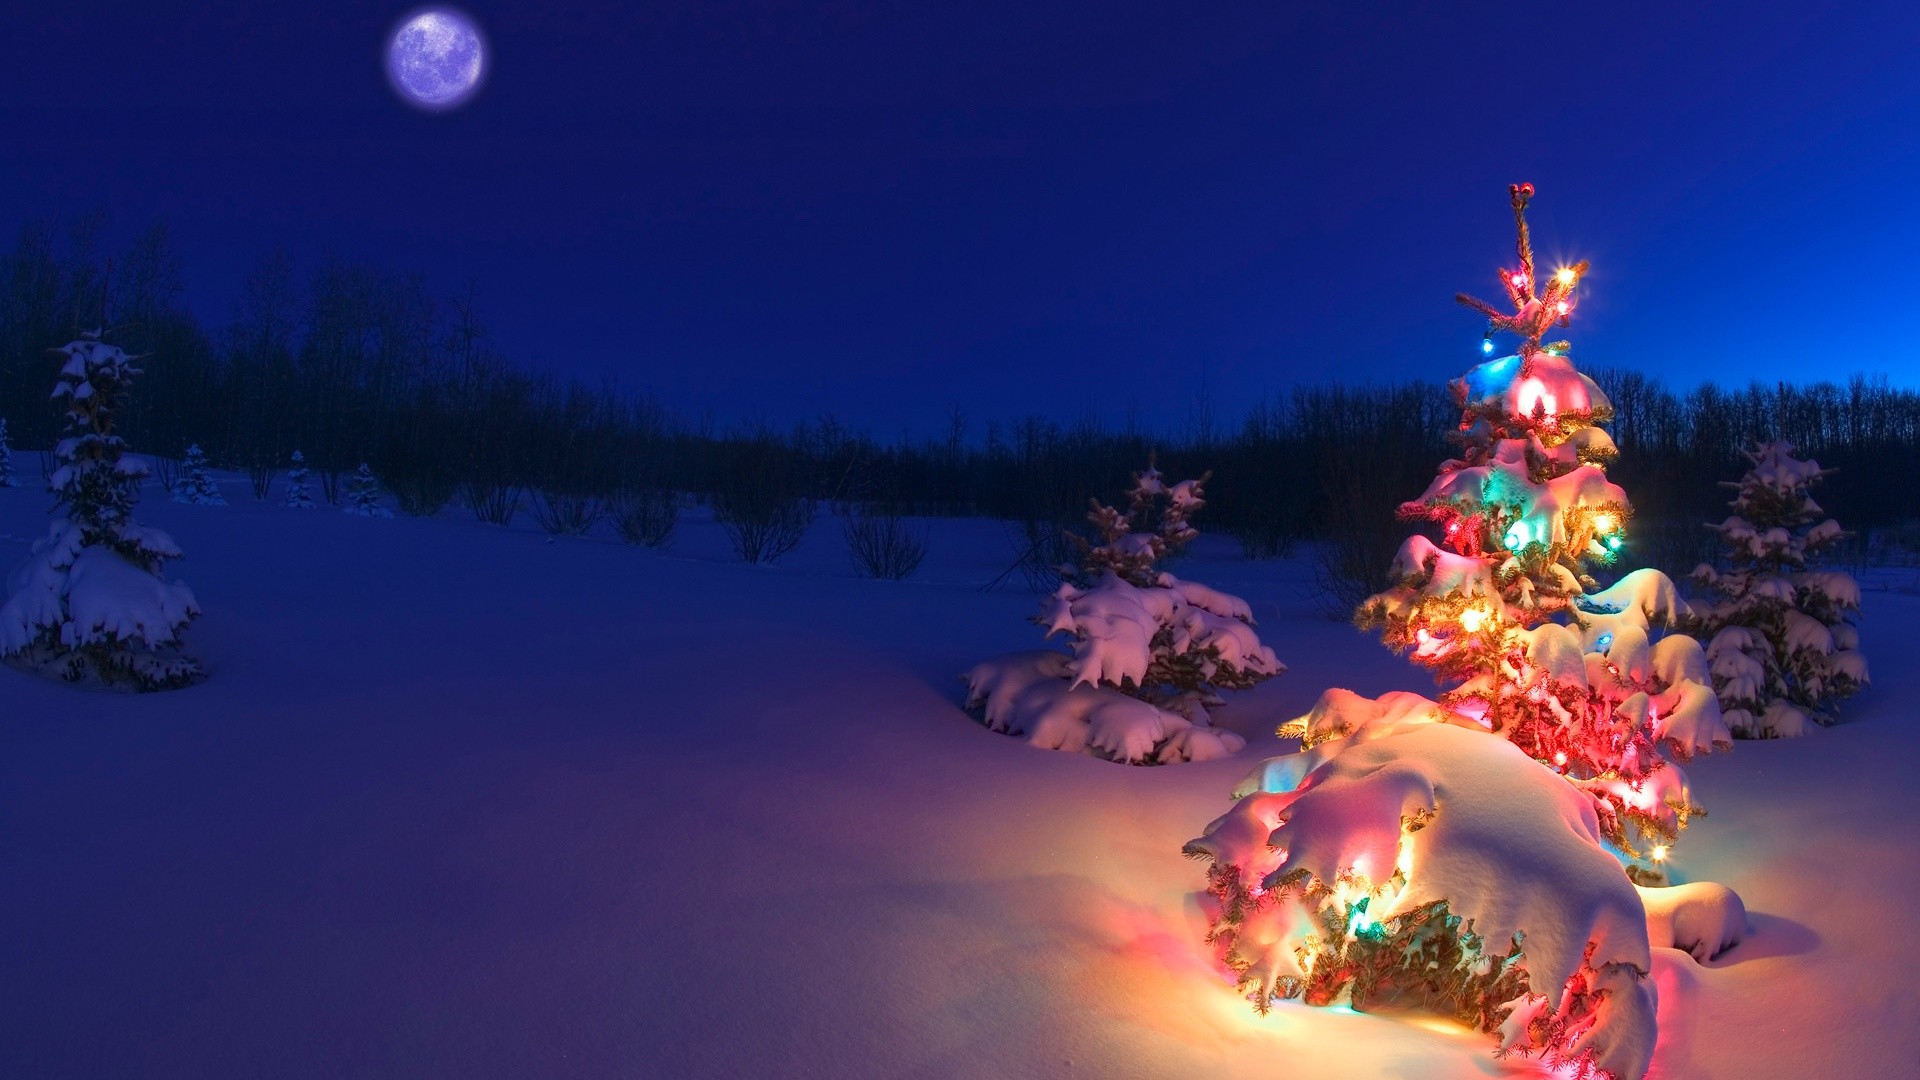 1920x1080 hd christmas wallpapers for free amazing images background photos windows  wallpapers download free images widescreen desktop backgrounds dual  monitors ...